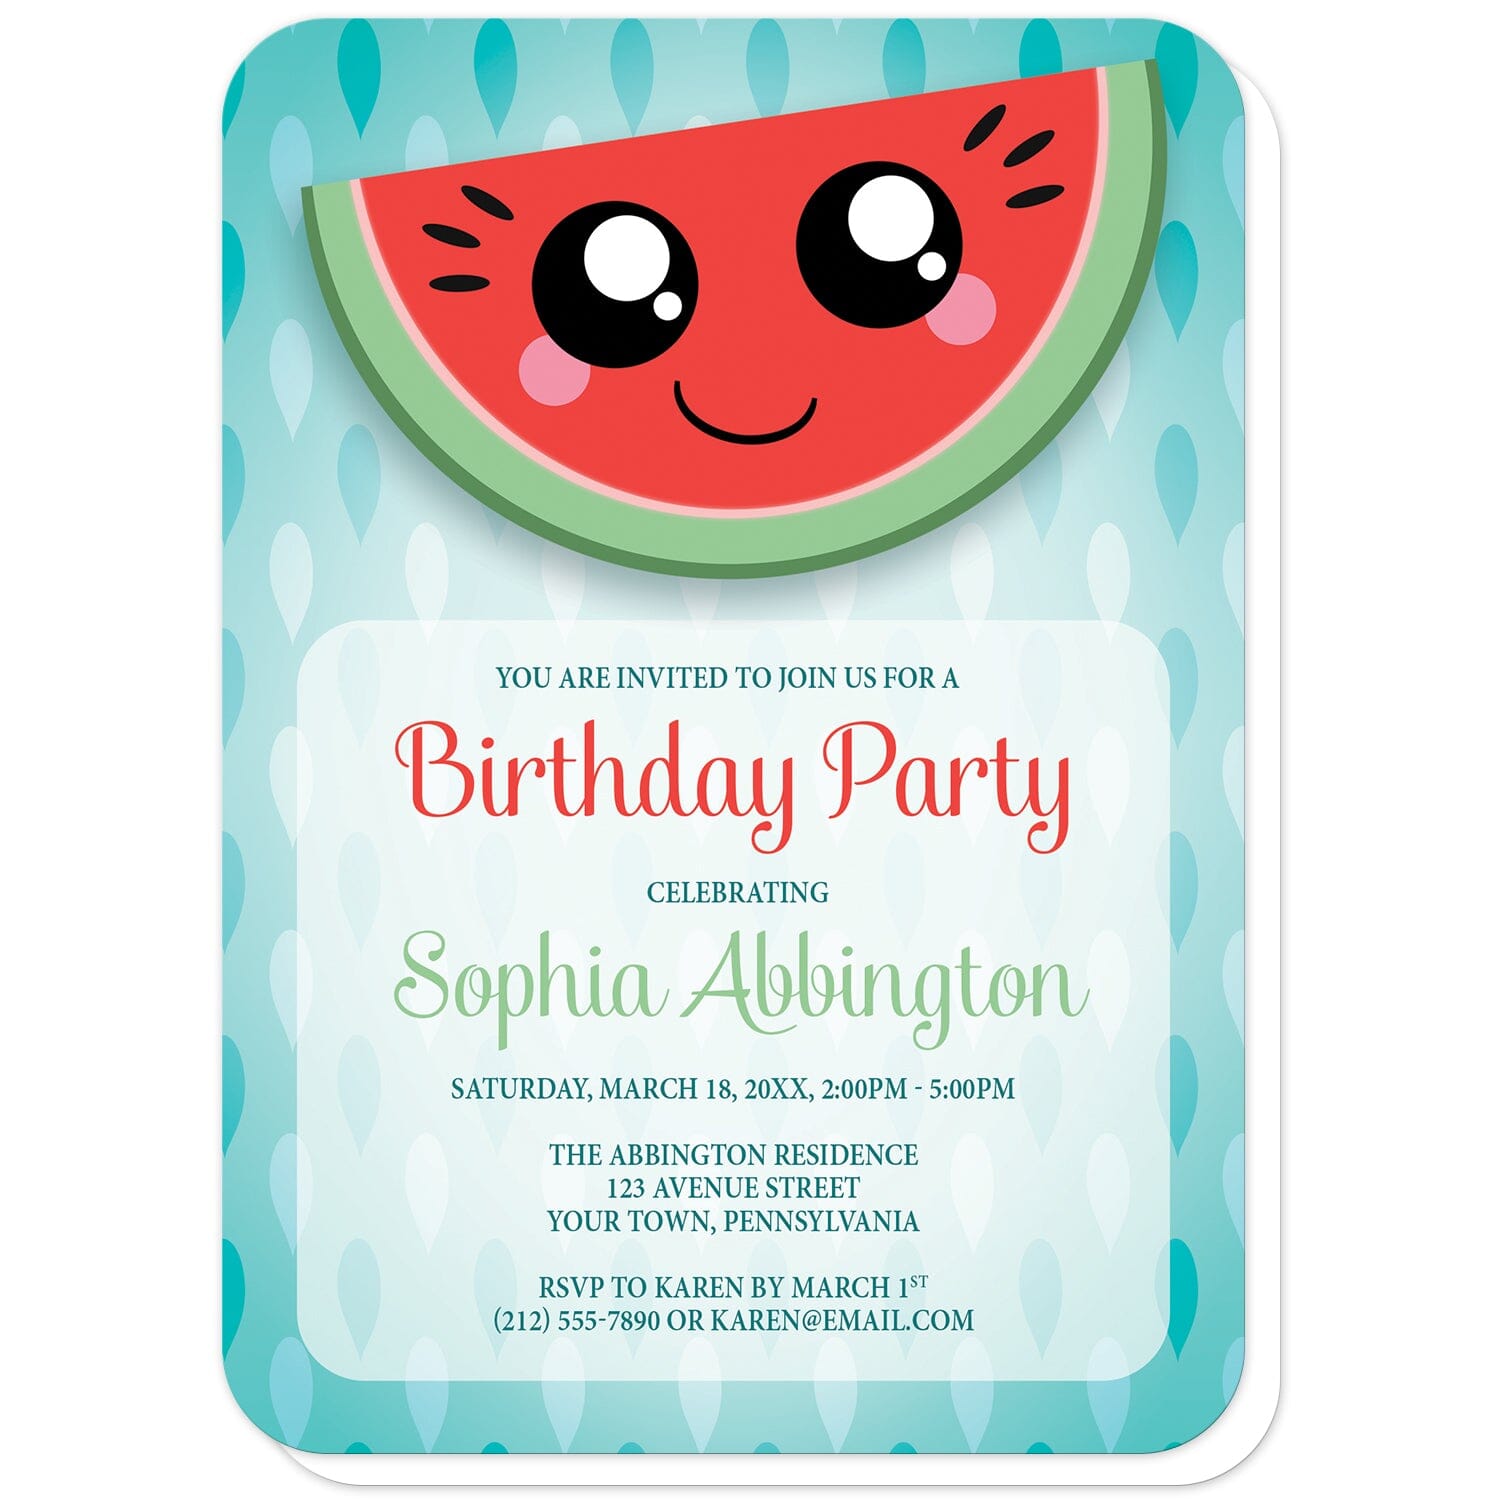 One in a Melon Mini Color Packs. Personalized. Party Favors. Kids